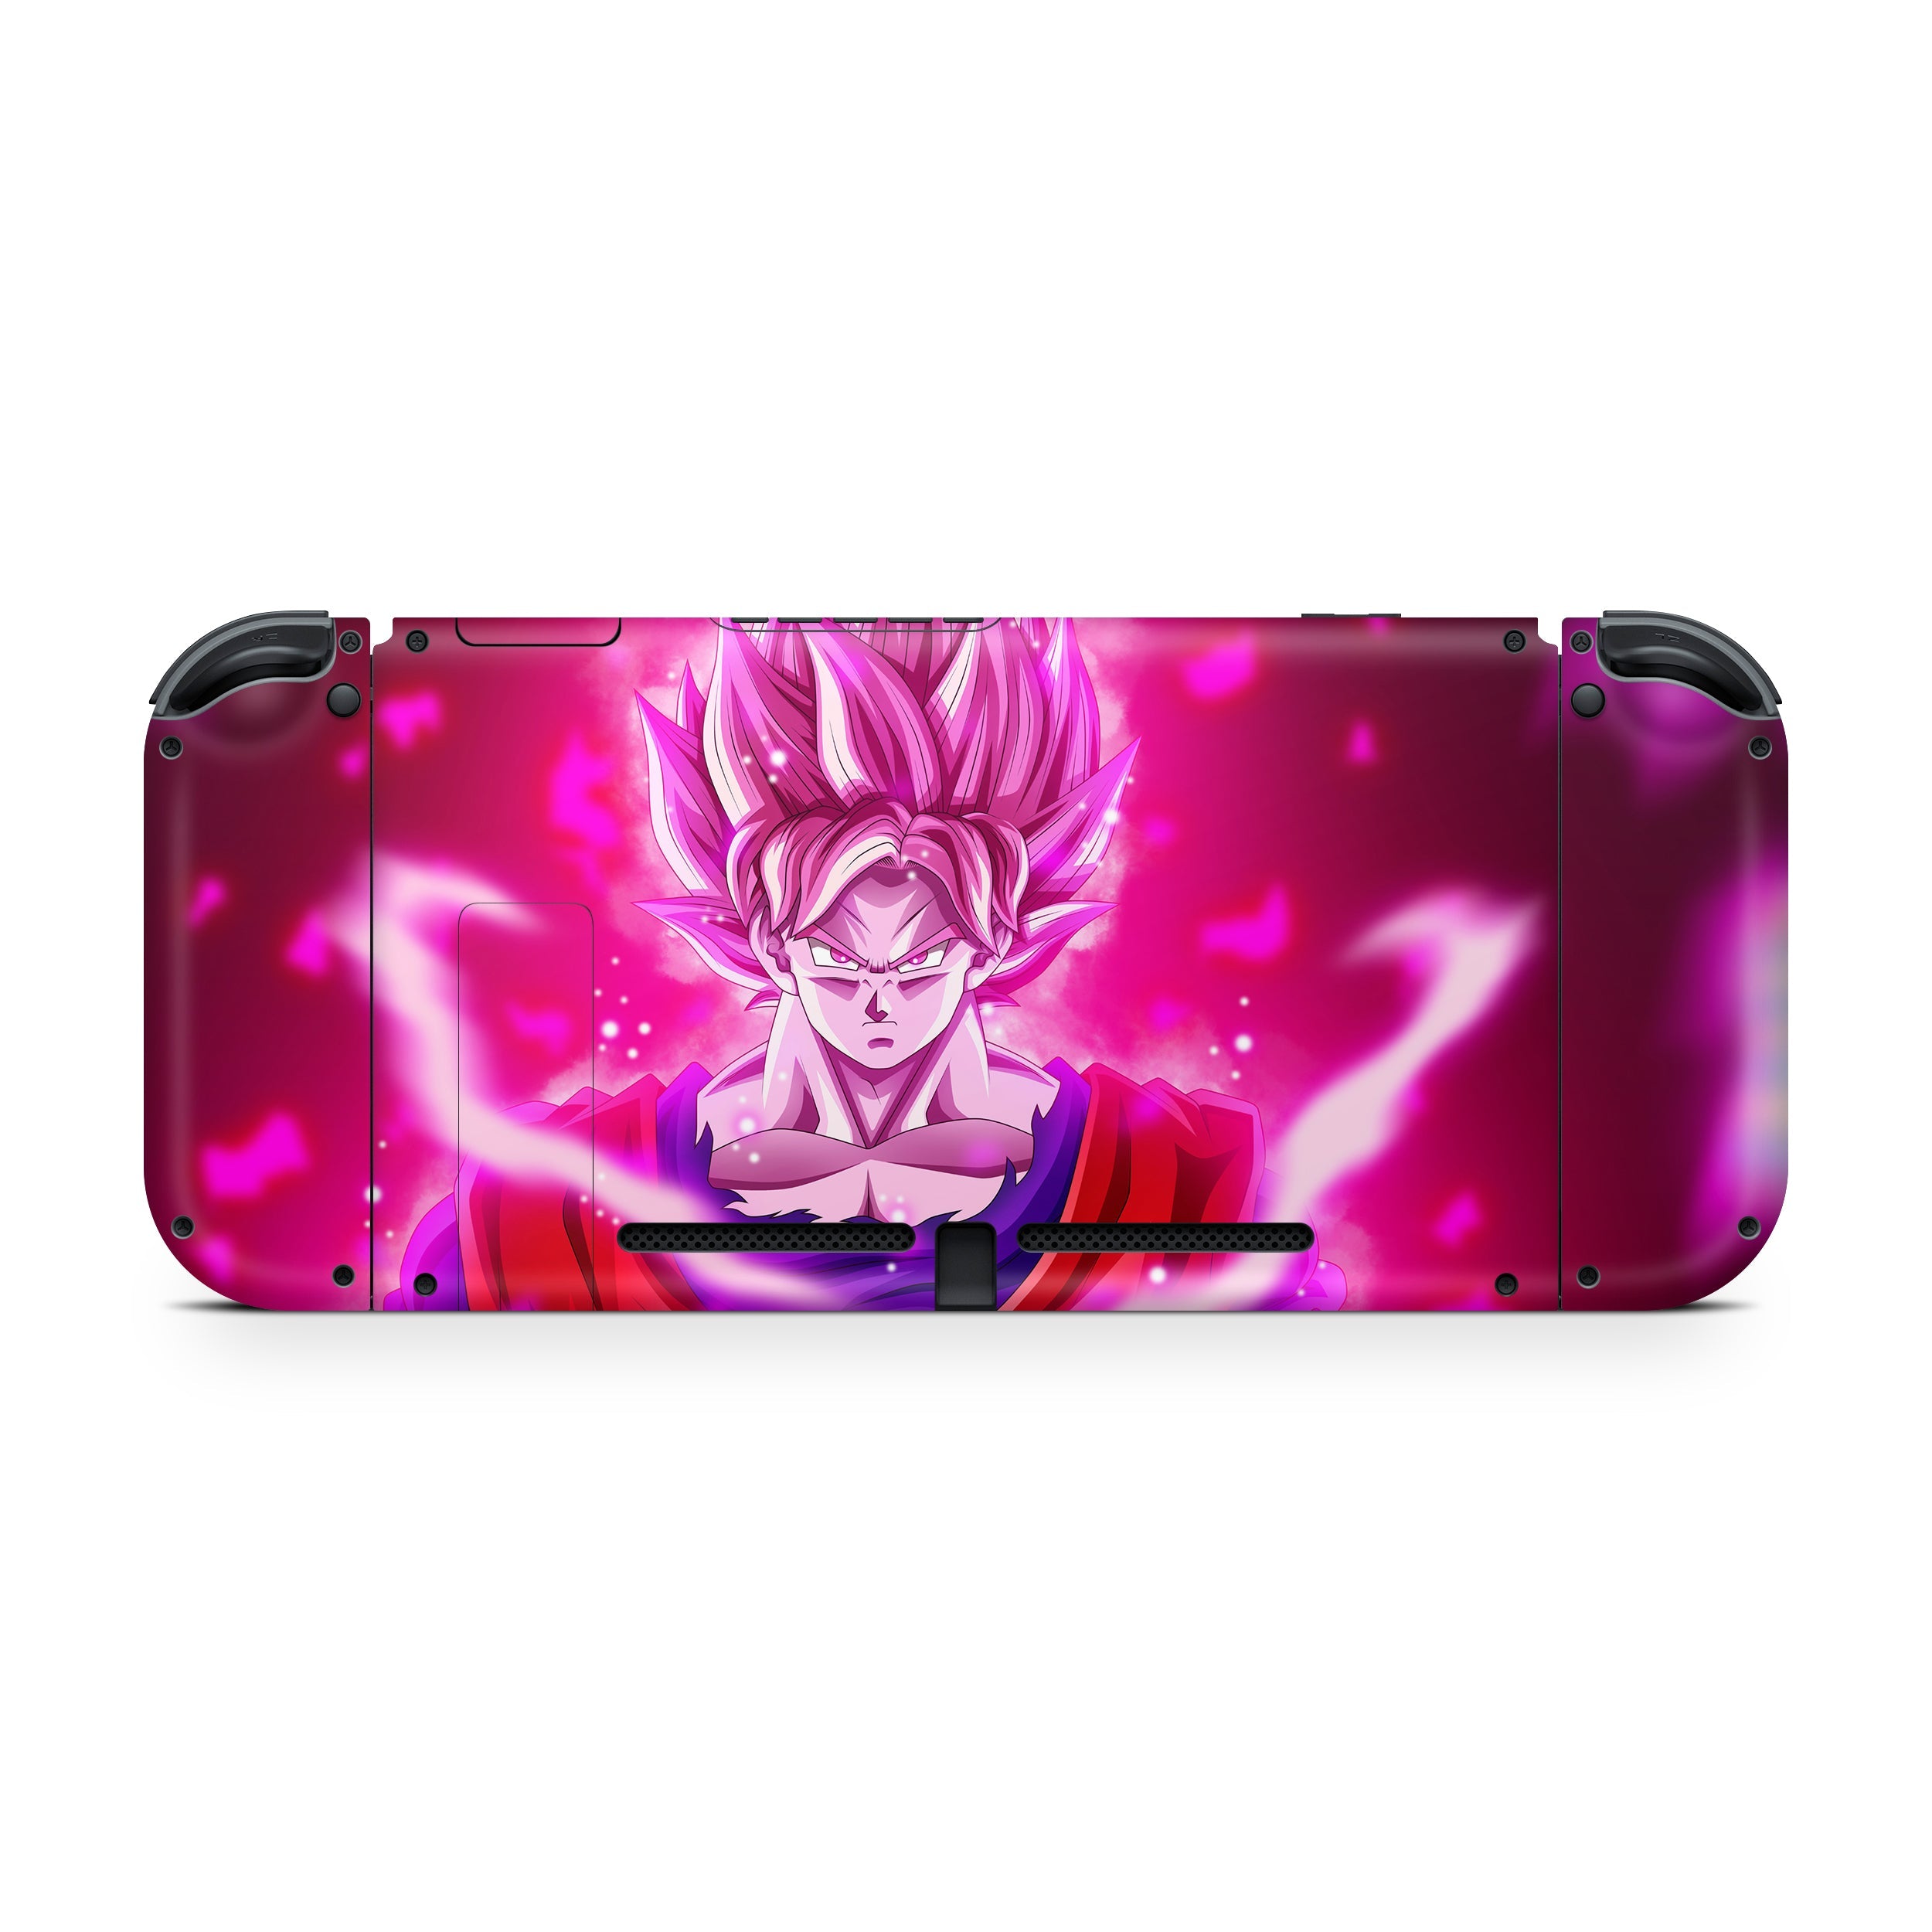 A video game skin featuring a Dragon Ball Z Goku design for the Nintendo Switch.